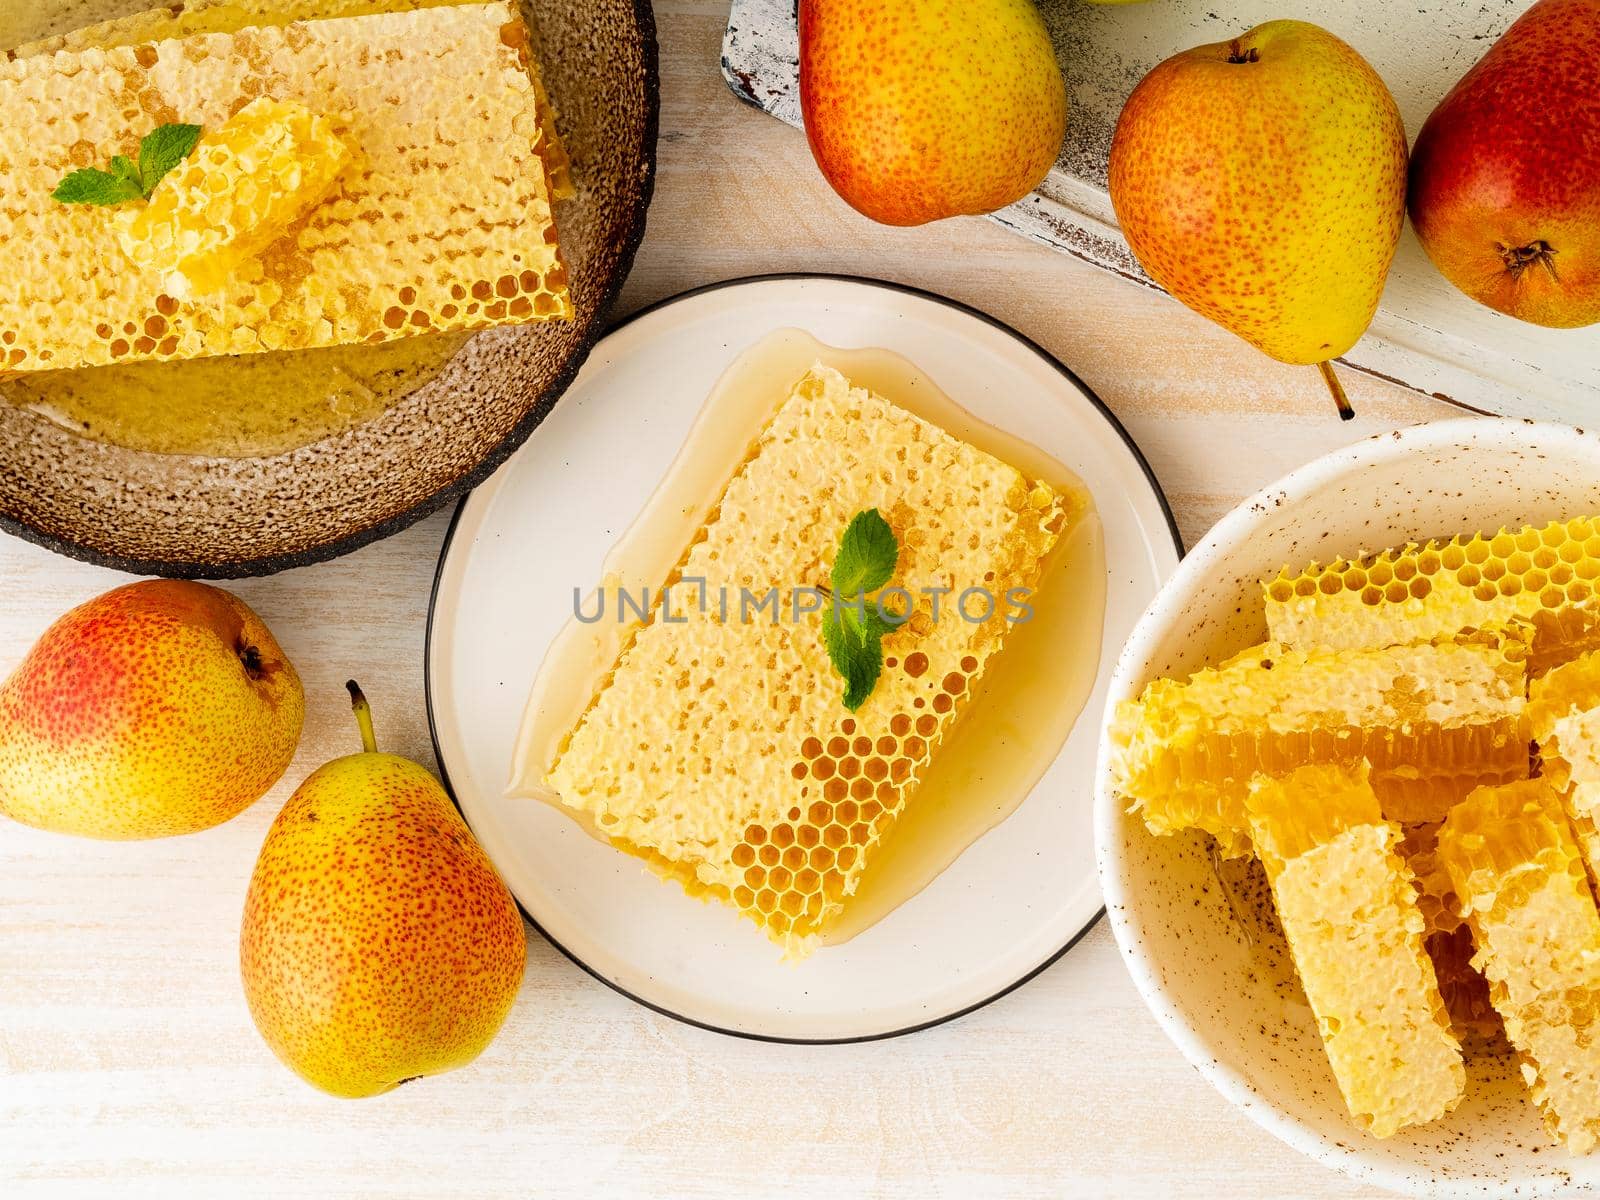 honey in honeycomb, close-up, on brown ceramic plate, on white wooden rustic table, top view